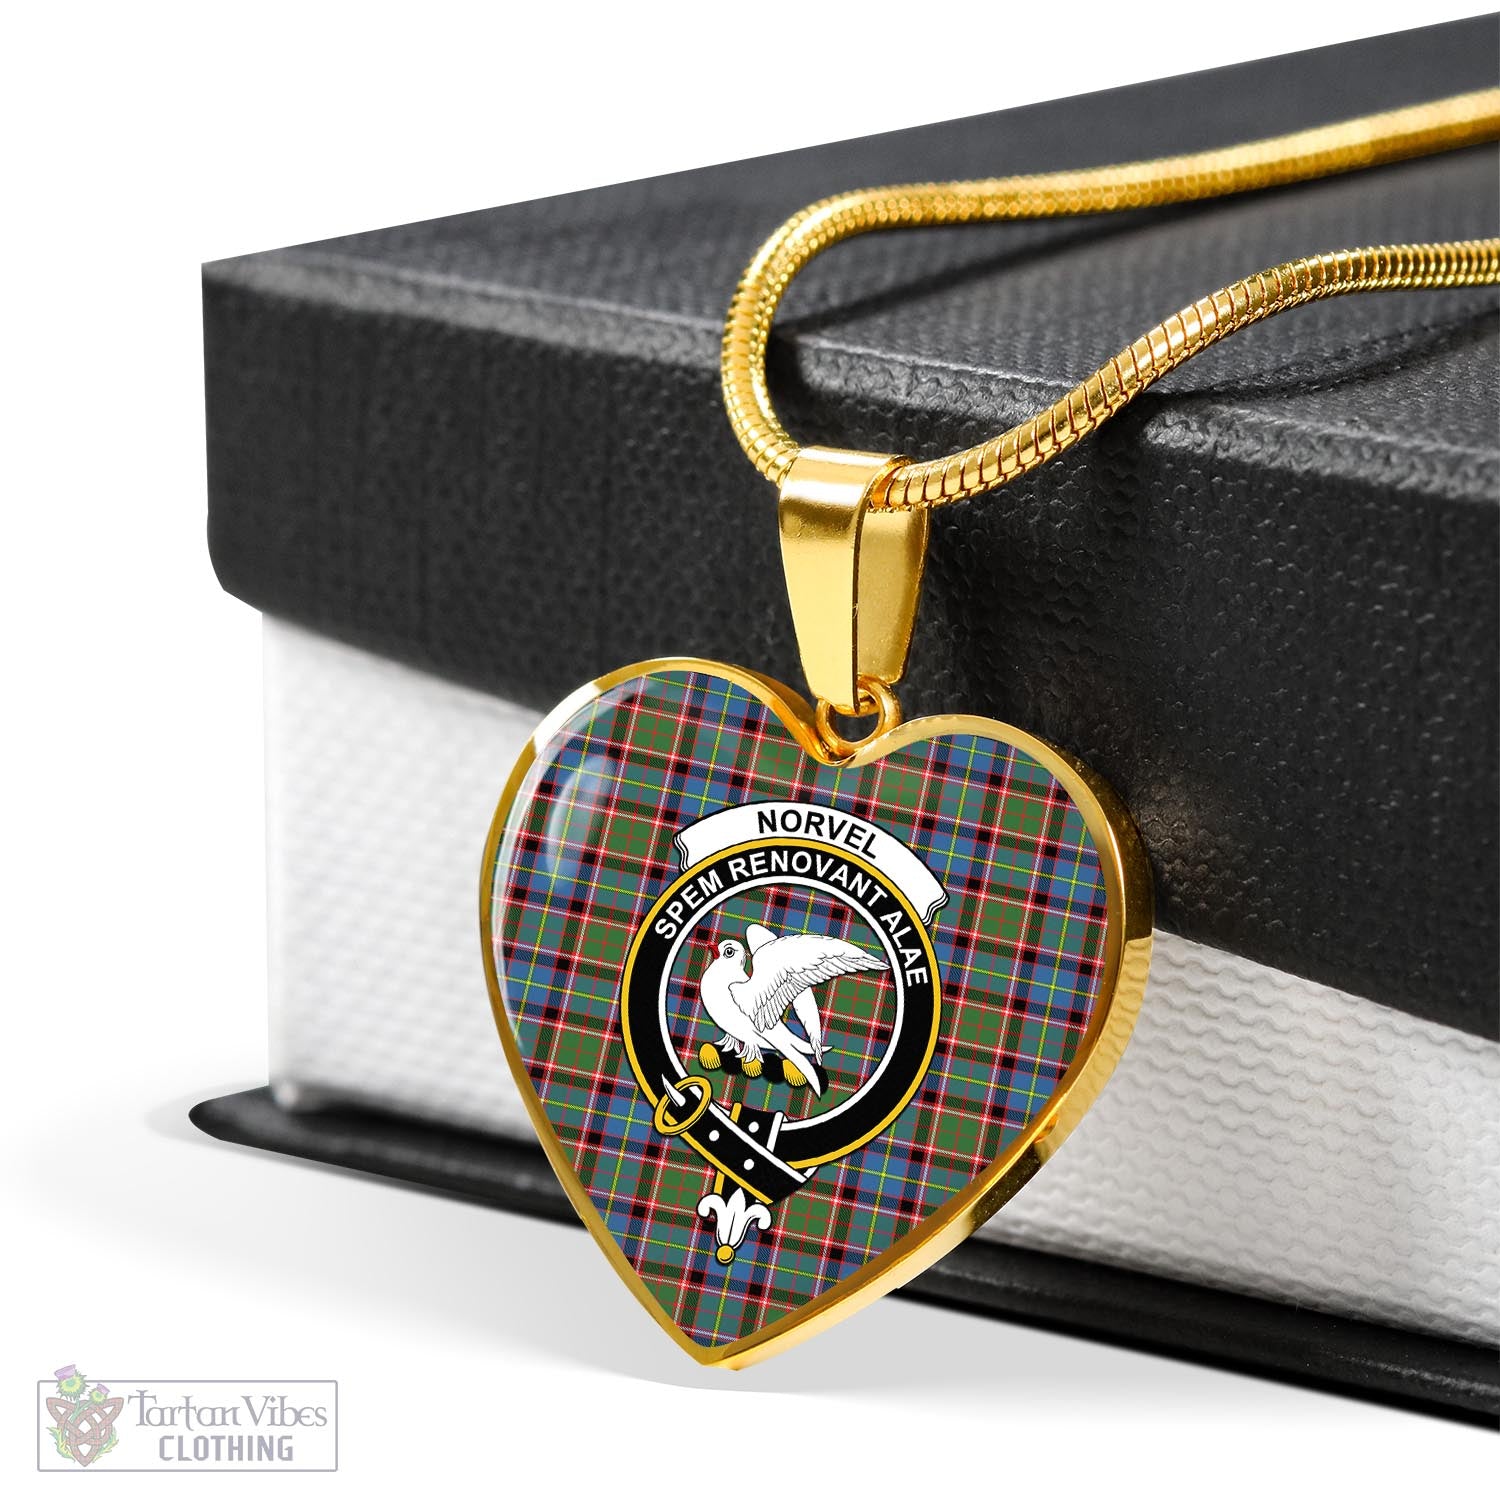 Tartan Vibes Clothing Norvel Tartan Heart Necklace with Family Crest